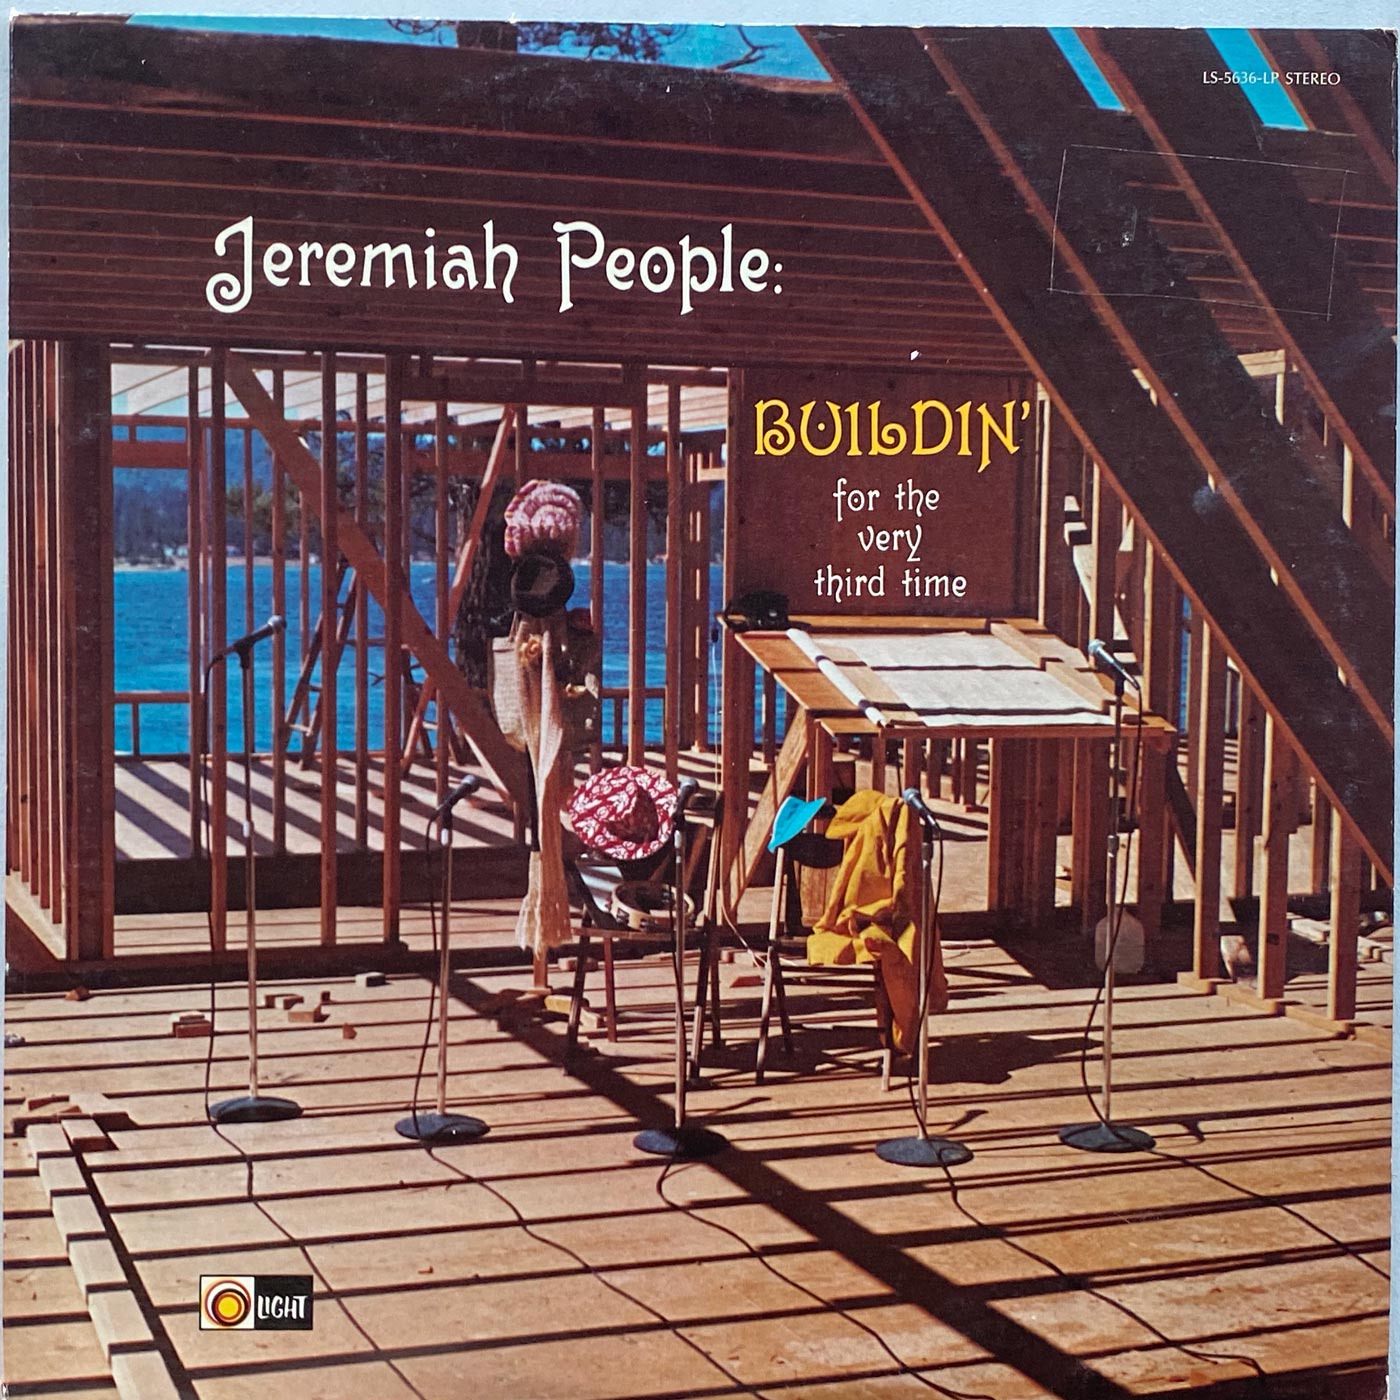 Jeremiah People - Buildin' for the very third time